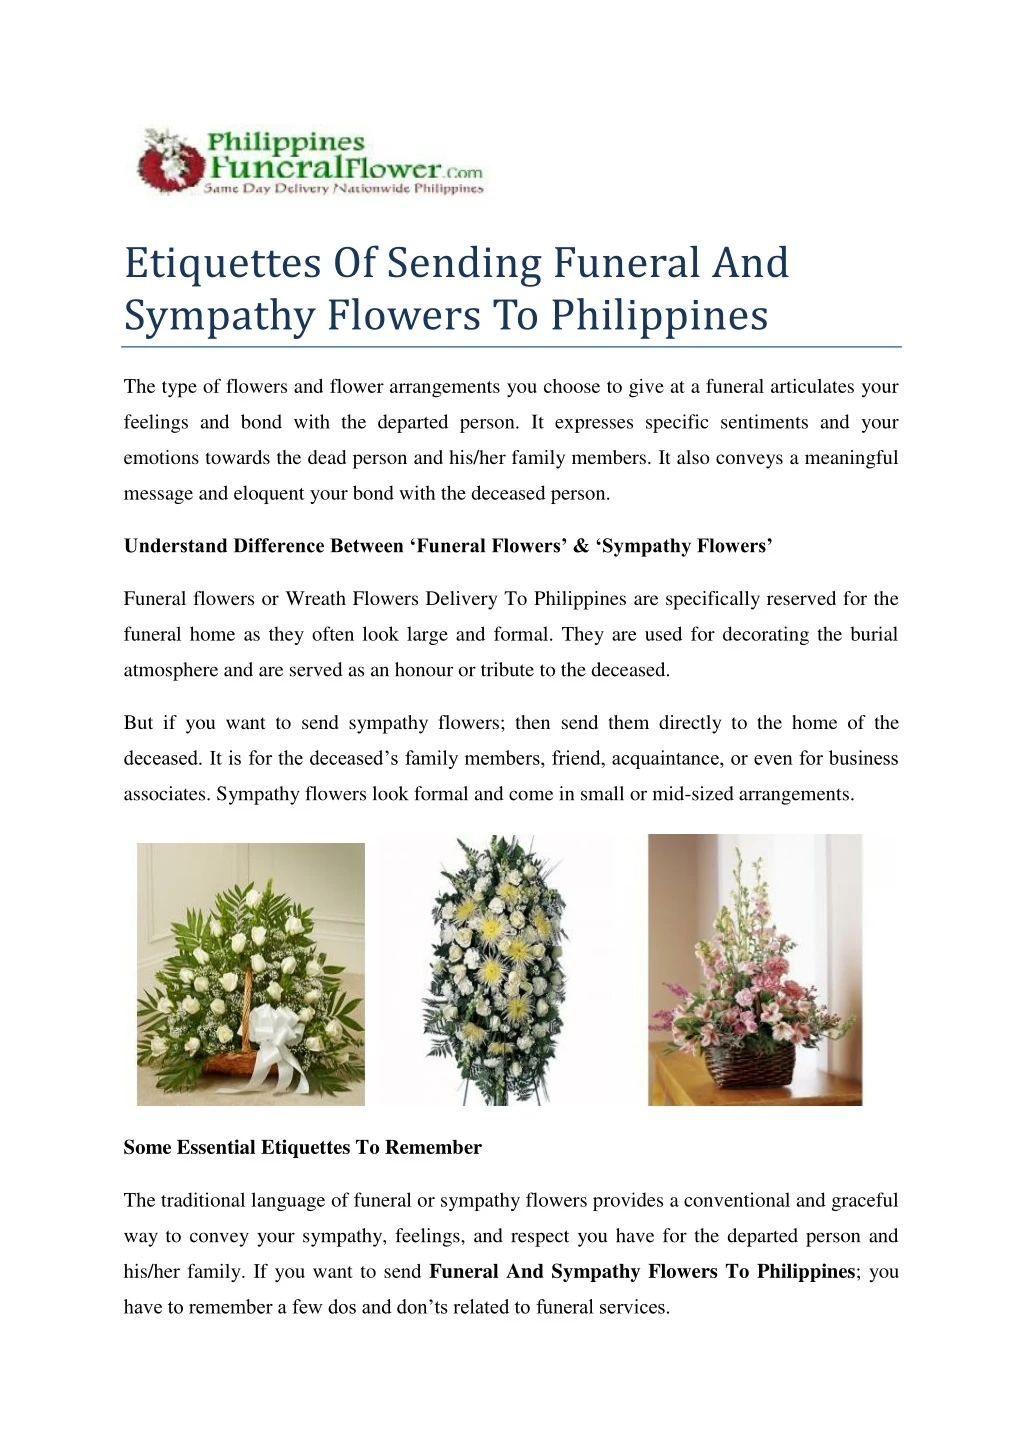 etiquettes of sending funeral and sympathy